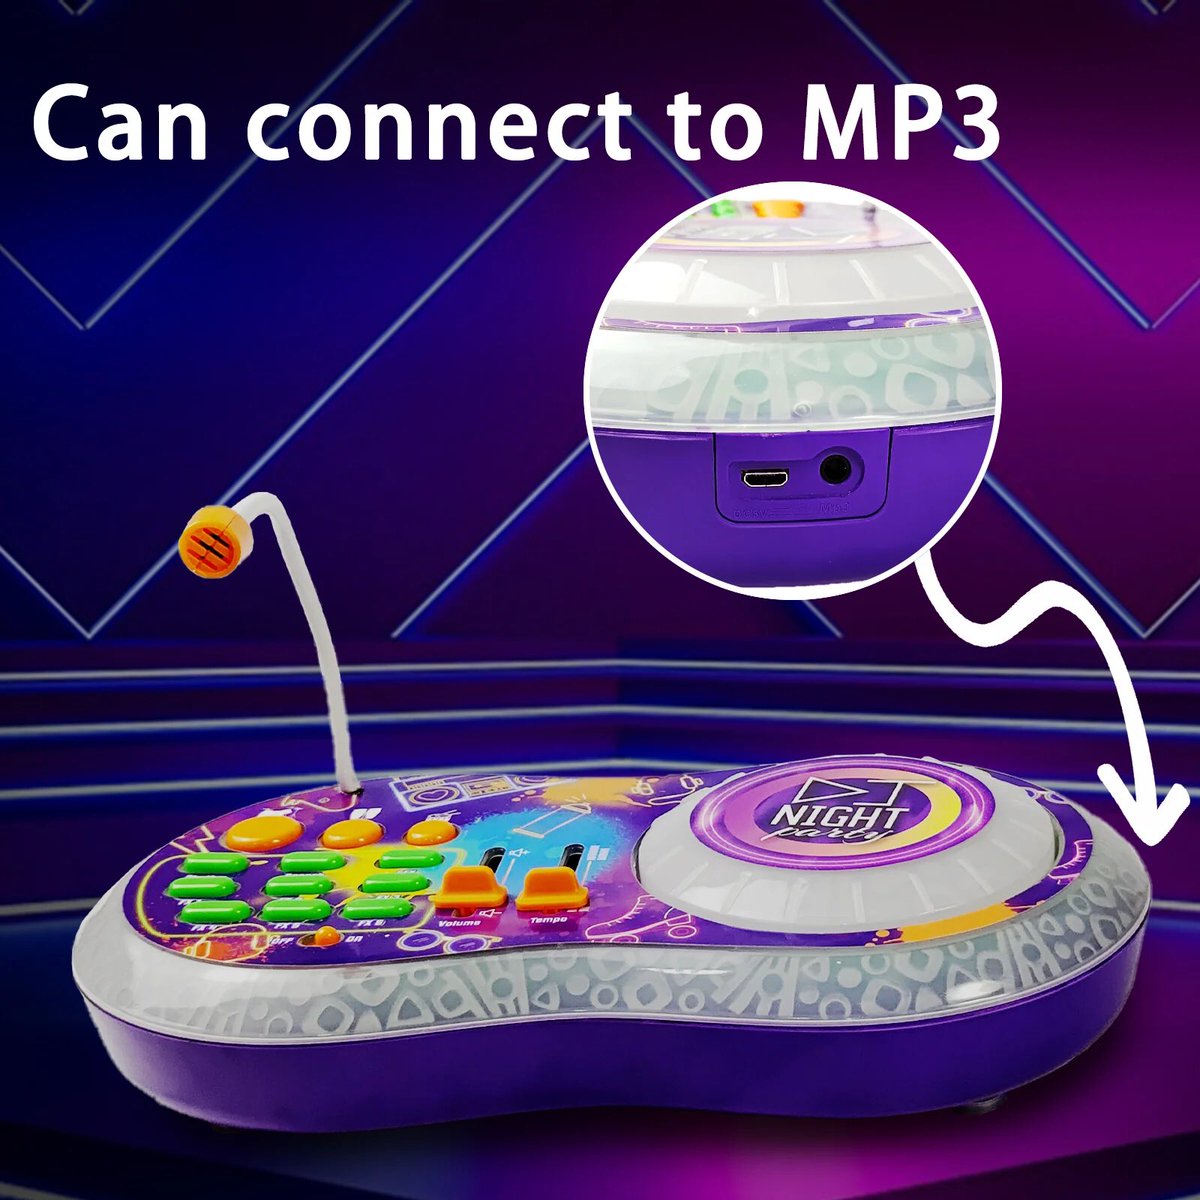 Unleash your child's inner DJ with our colorful and interactive music toy! 🎶👶 Perfect for early musical development and endless fun. 🎧🕺

#fyp #kidsmusic #musicforkids #kidstoys #toddlertoys #aoqimitenjoy